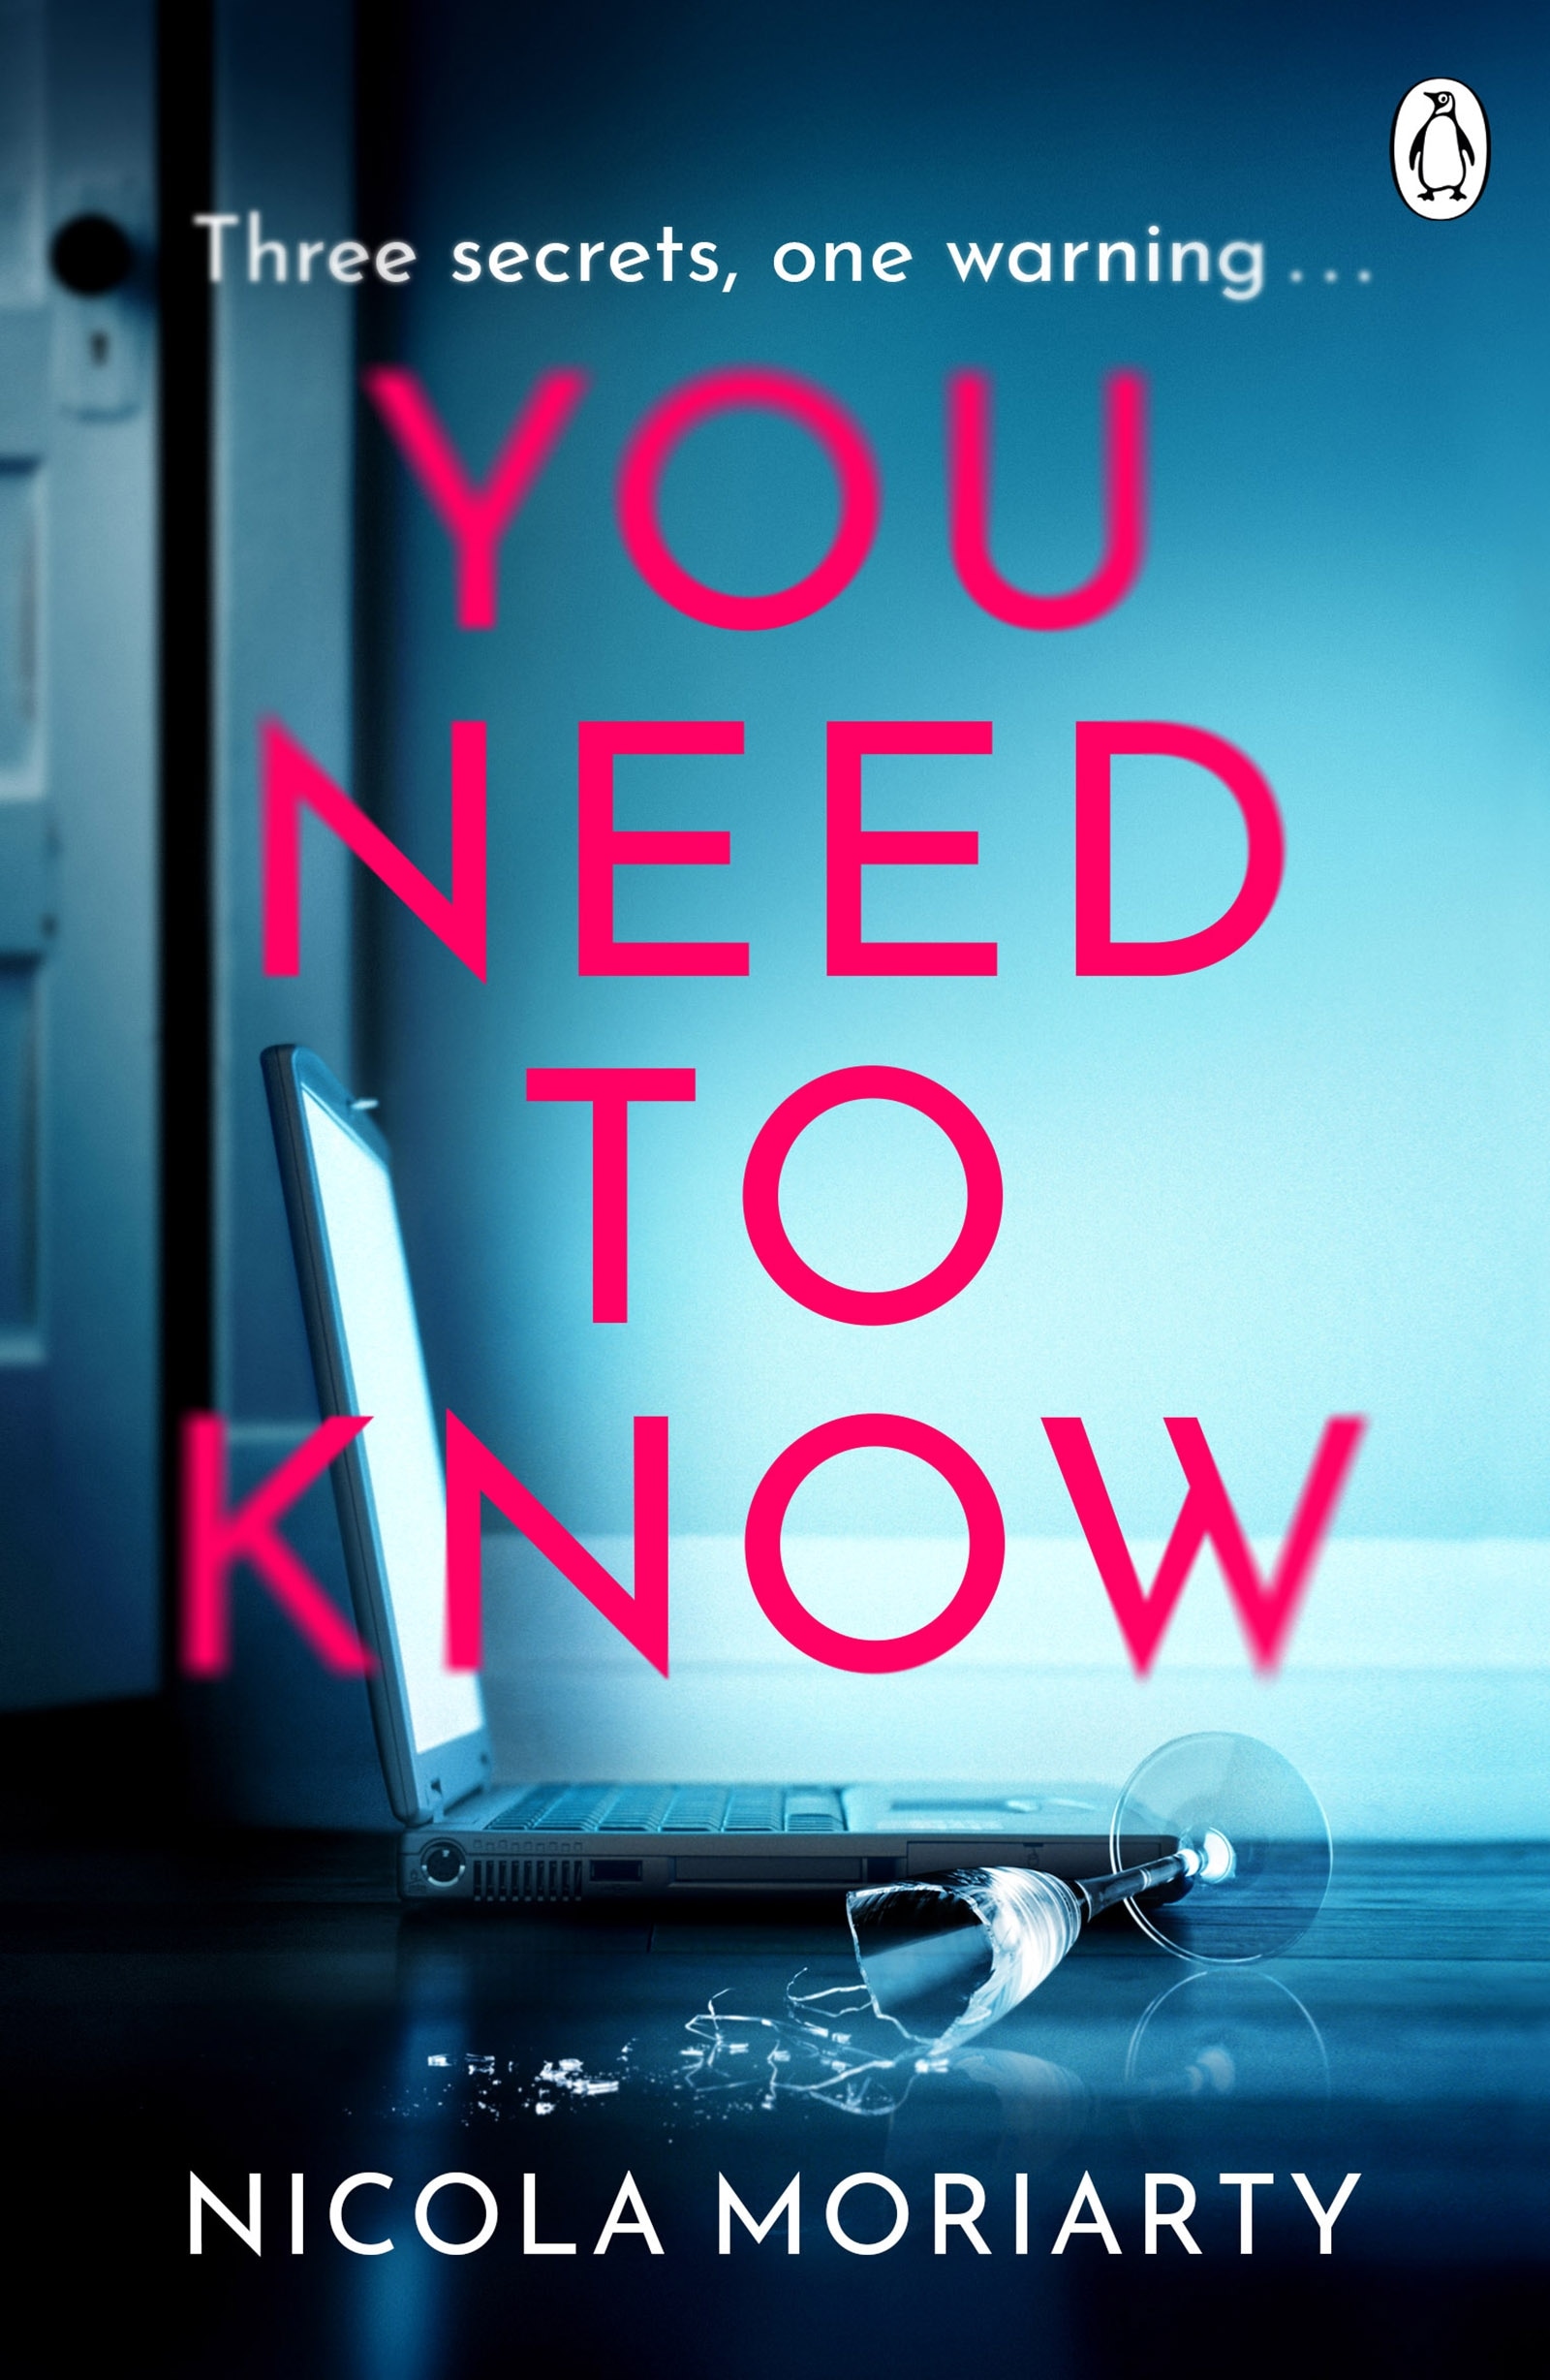 Book “You Need To Know” by Nicola Moriarty — May 27, 2021